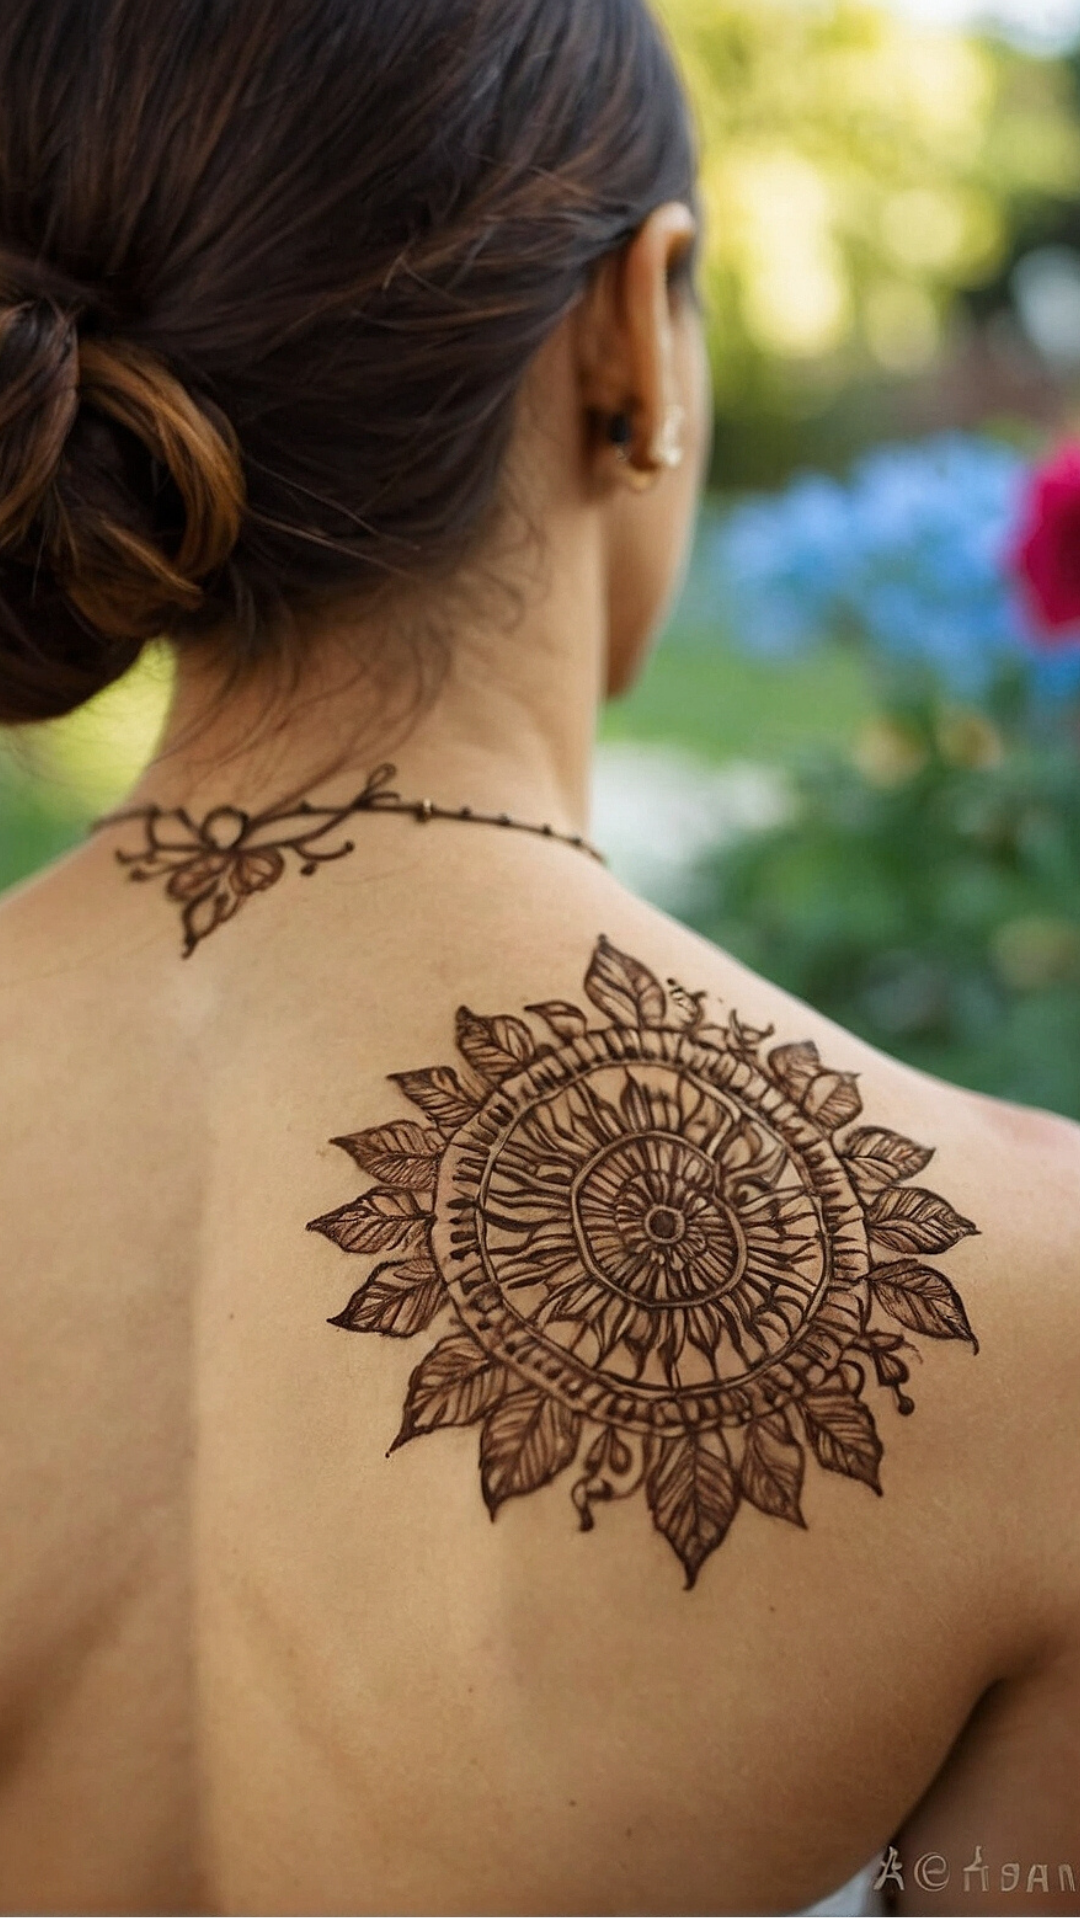 Henna Passion: Intricate Designs for Summer Festivals